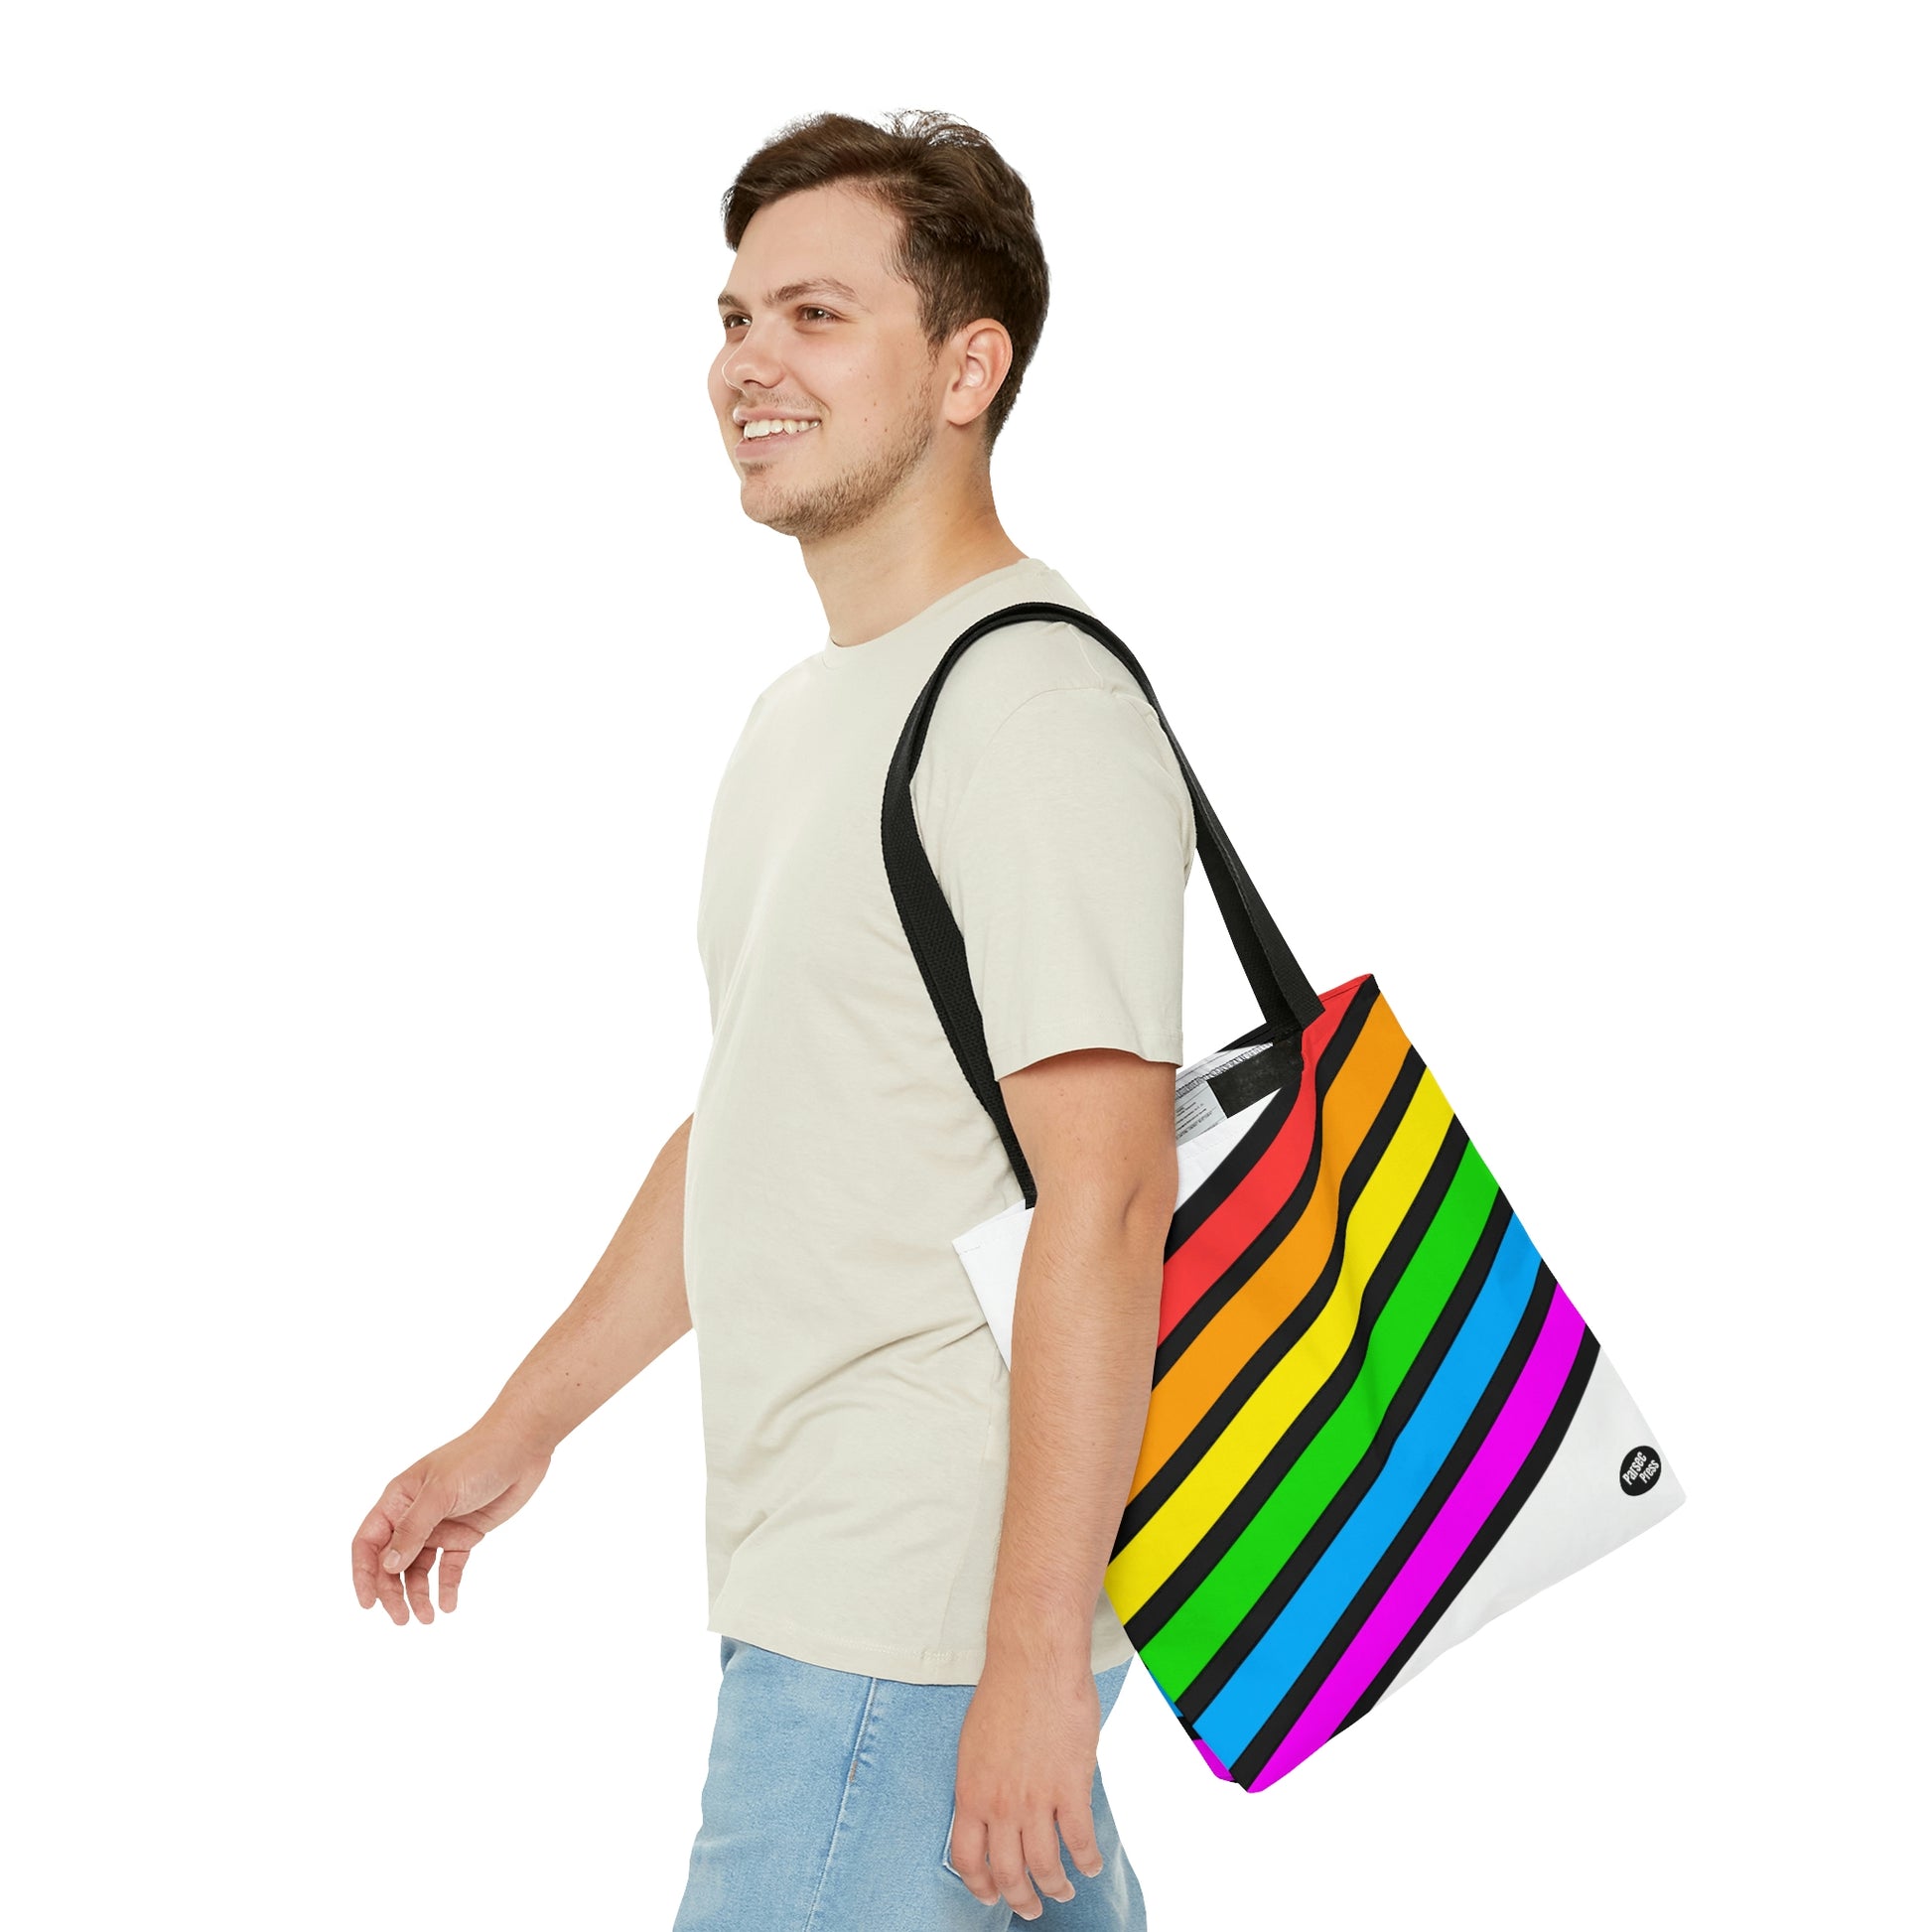 PRIDE Tote Bag Show your pride, Be Kind Show your LGBTQ support